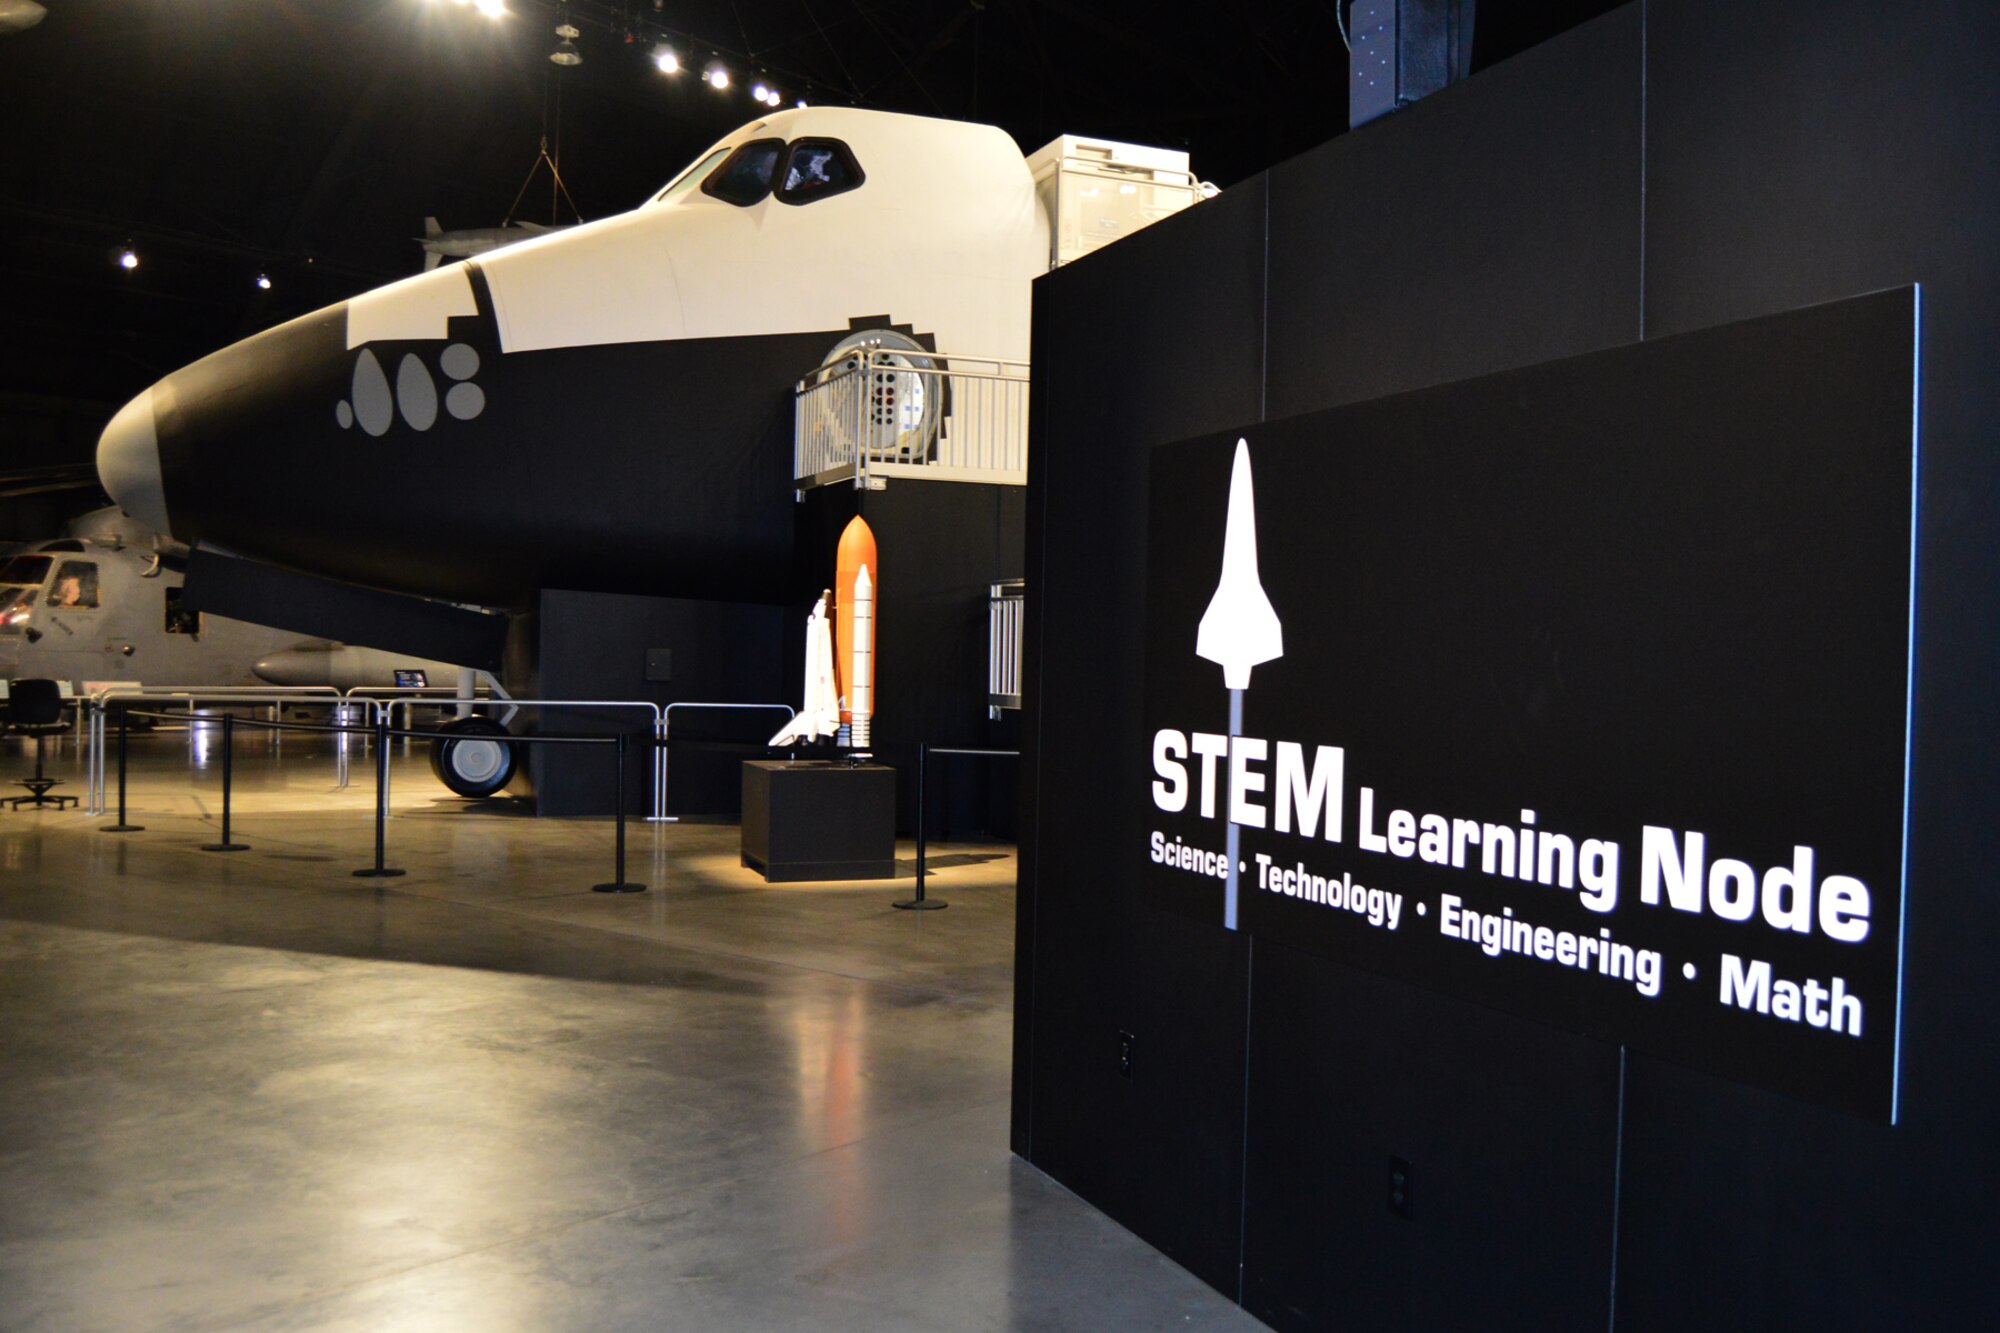 DAYTON, Ohio -- A general view of the  STEM Learning Node, which is adjacent to the space shuttle exhibit in the Cold War Gallery at the National Museum of the U.S. Air Force. (U.S. Air Force photo)